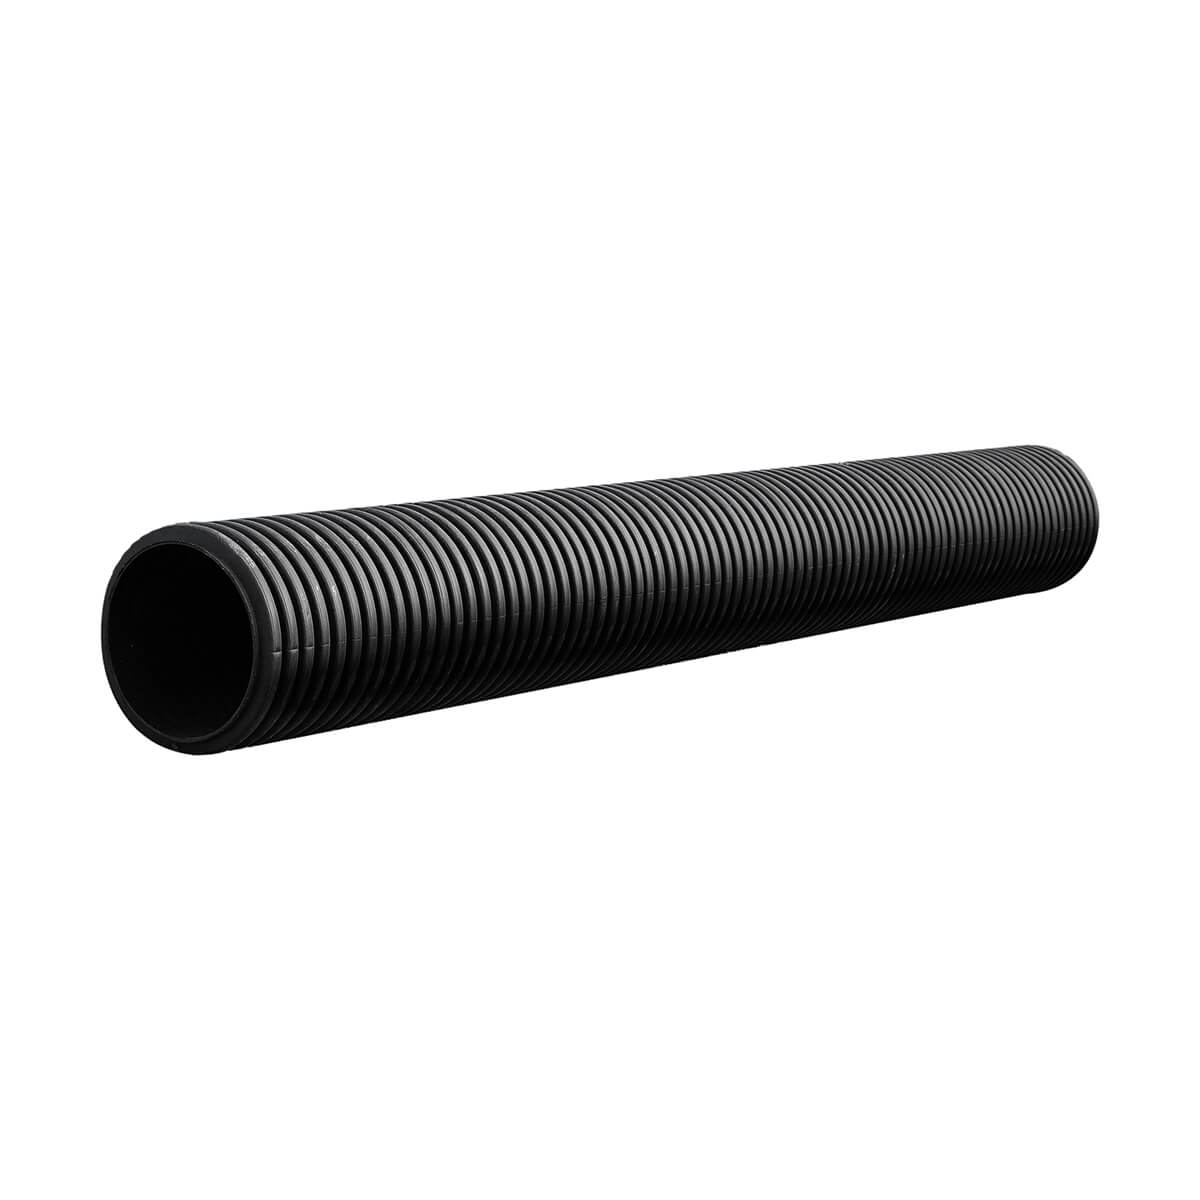 HDPE pipe - 12-in